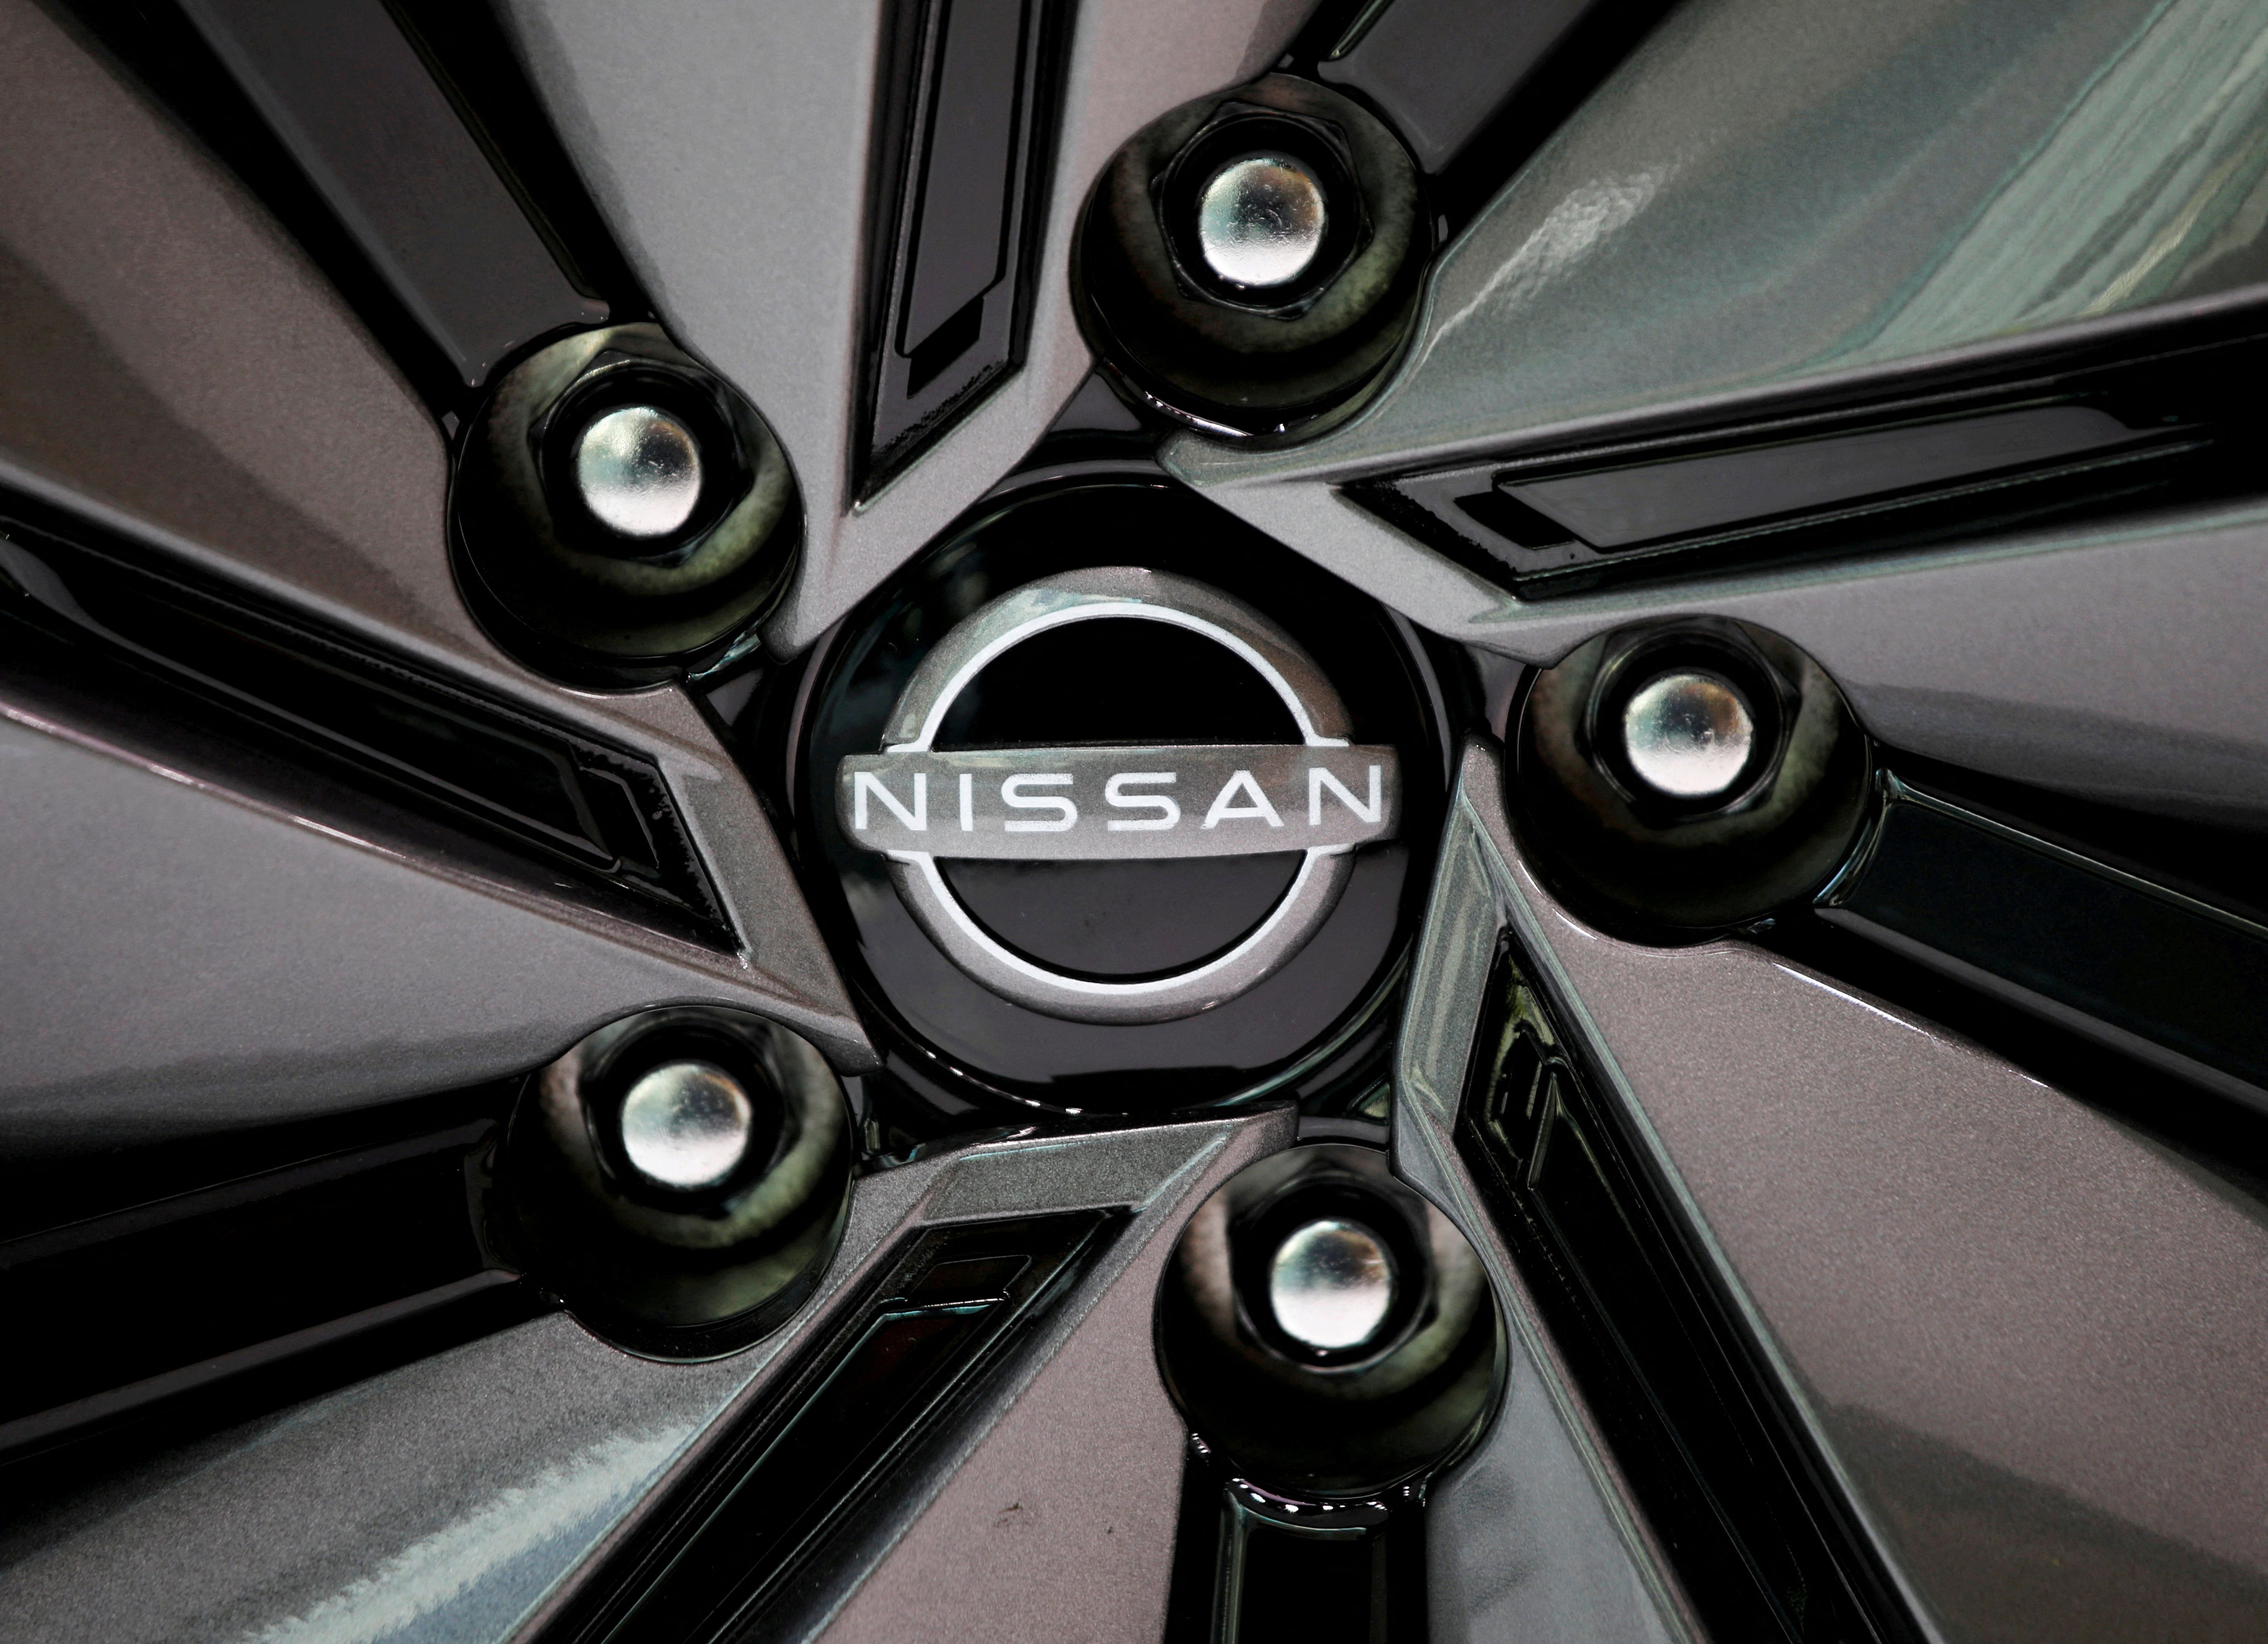 The logo of Nissan Motor Corp is seen on a wheel of a car at a Nissan showroom in Tokyo